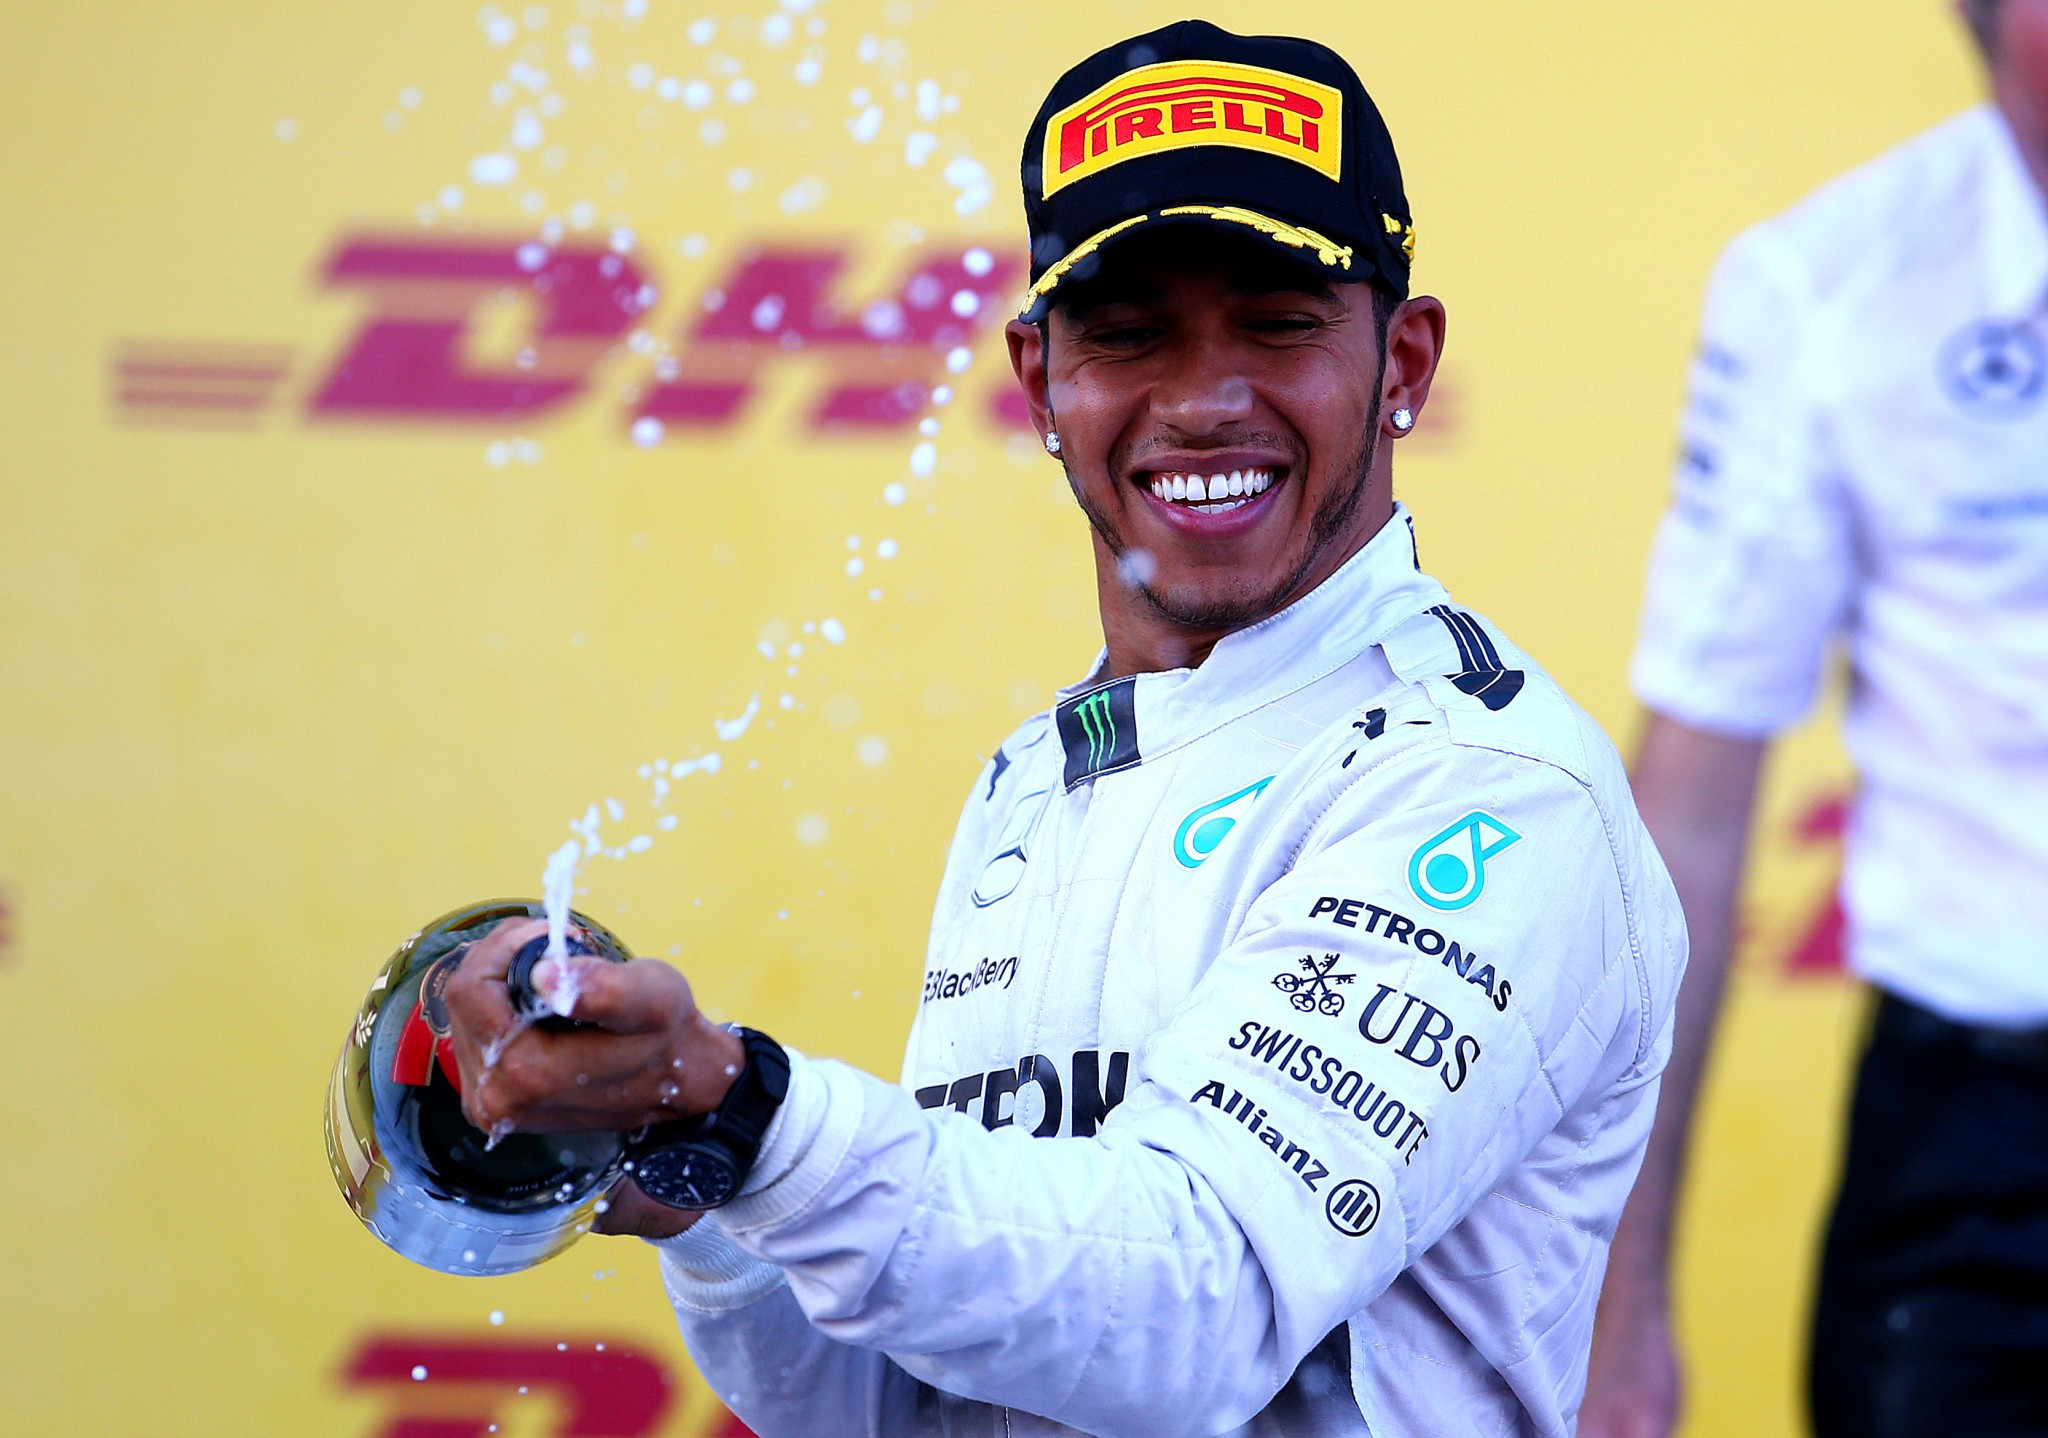 Lewis Hamilton donated his Mercedes racing suit, gloves and boots to the cause ©Getty Images